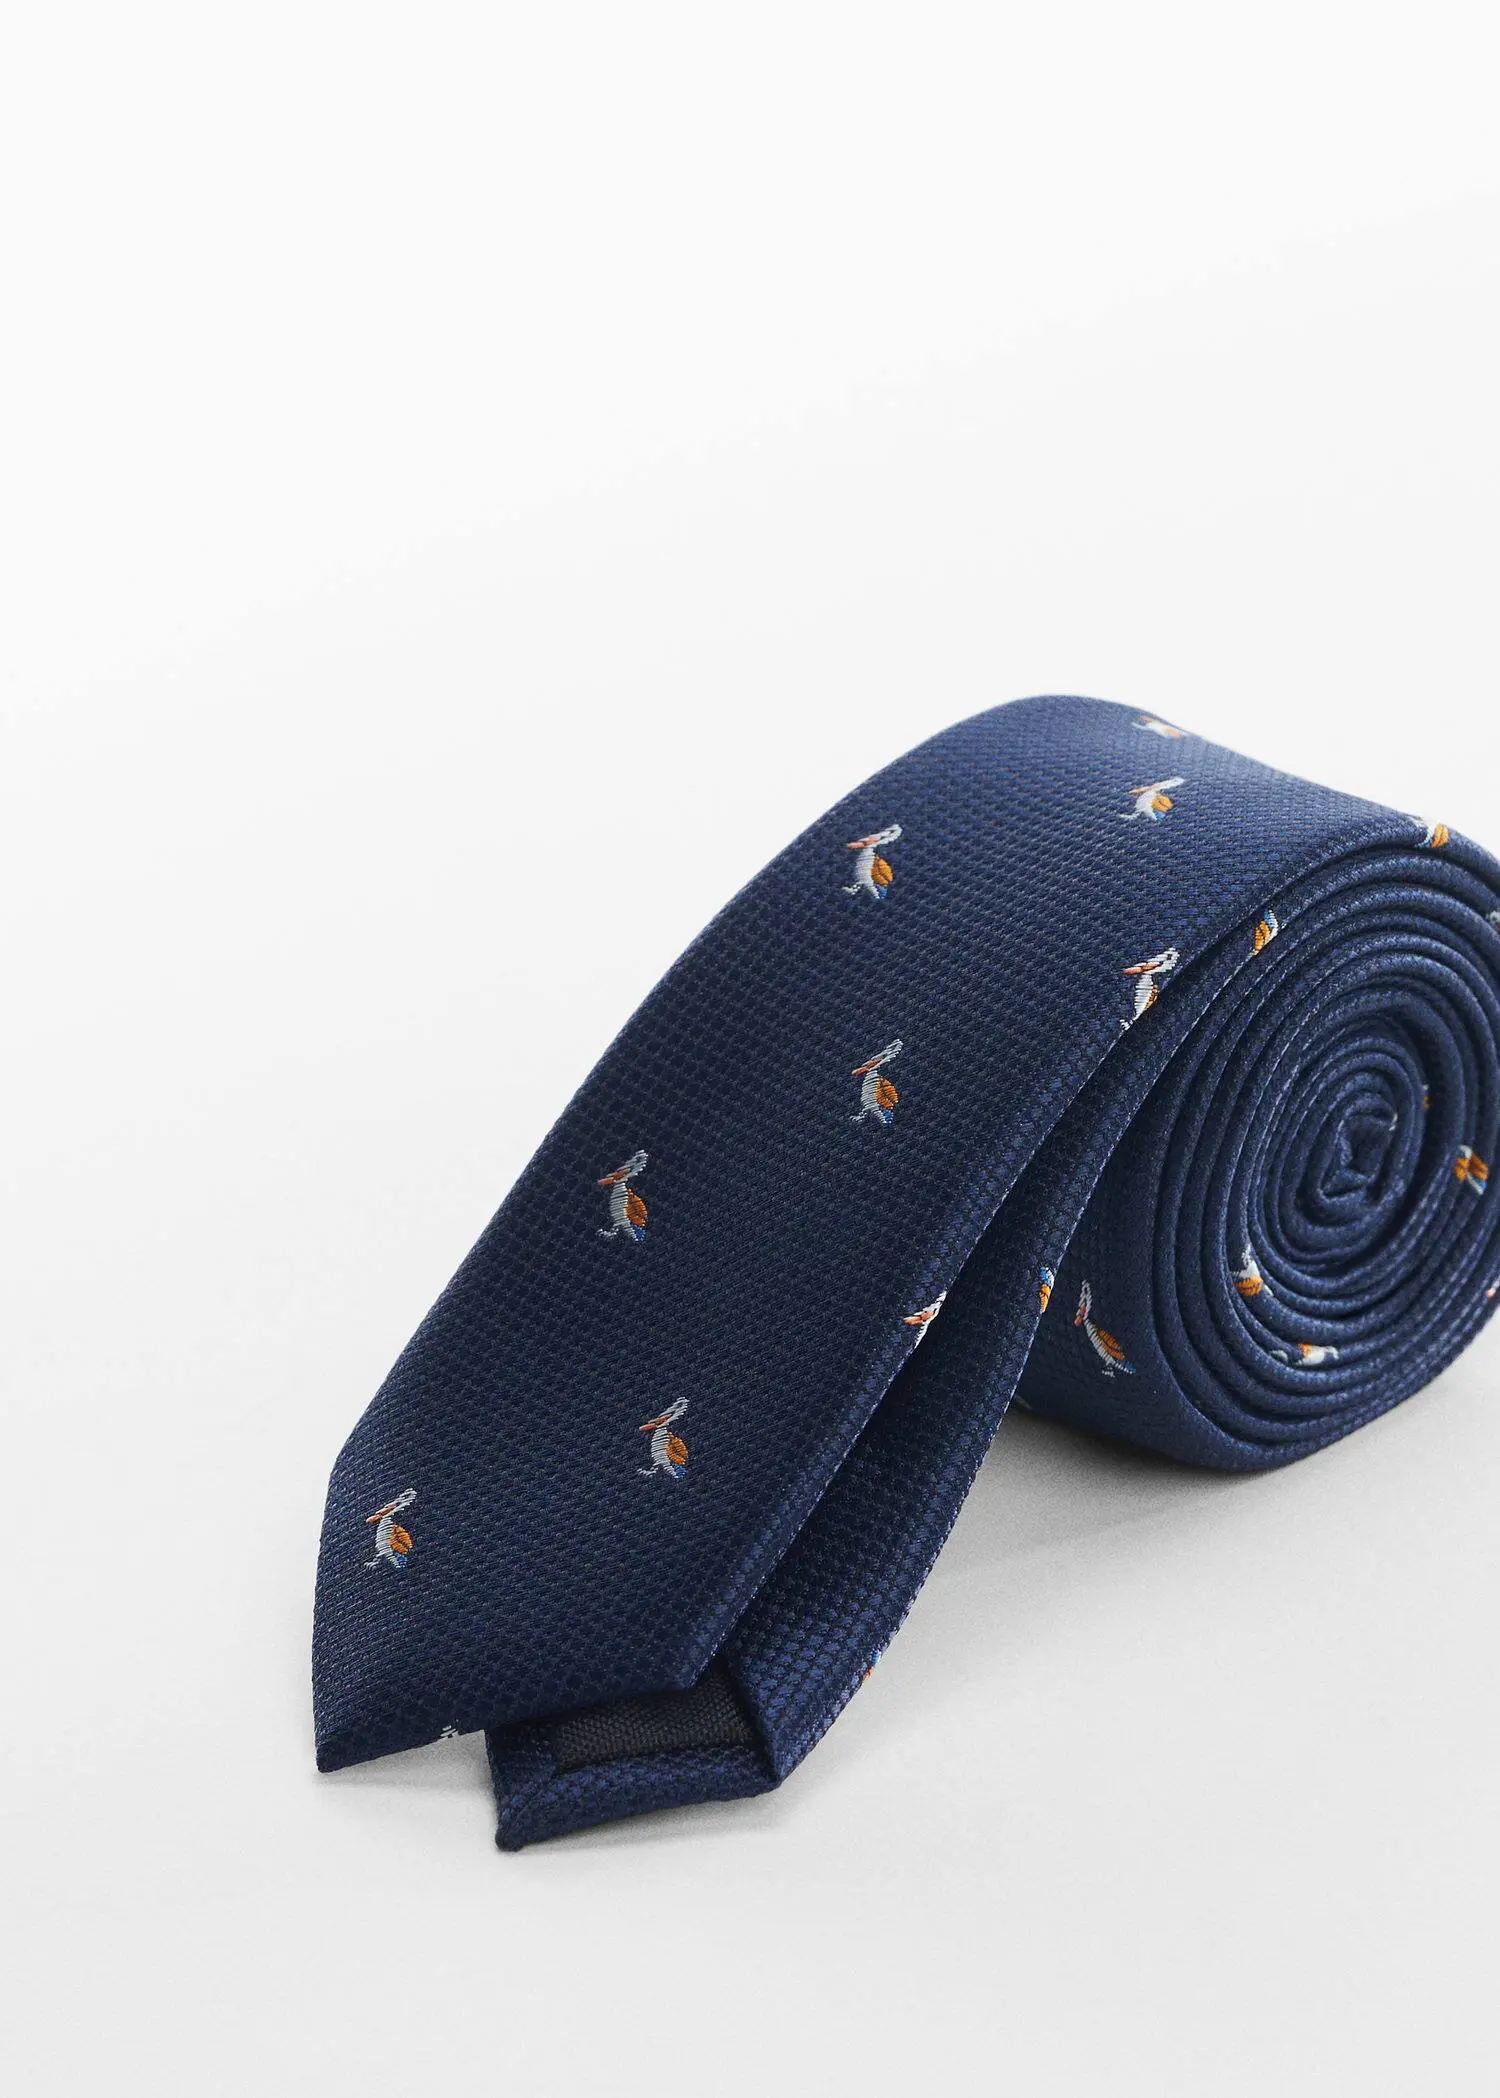 Mango Tie with animals print . a close up of a tie on top of a table 